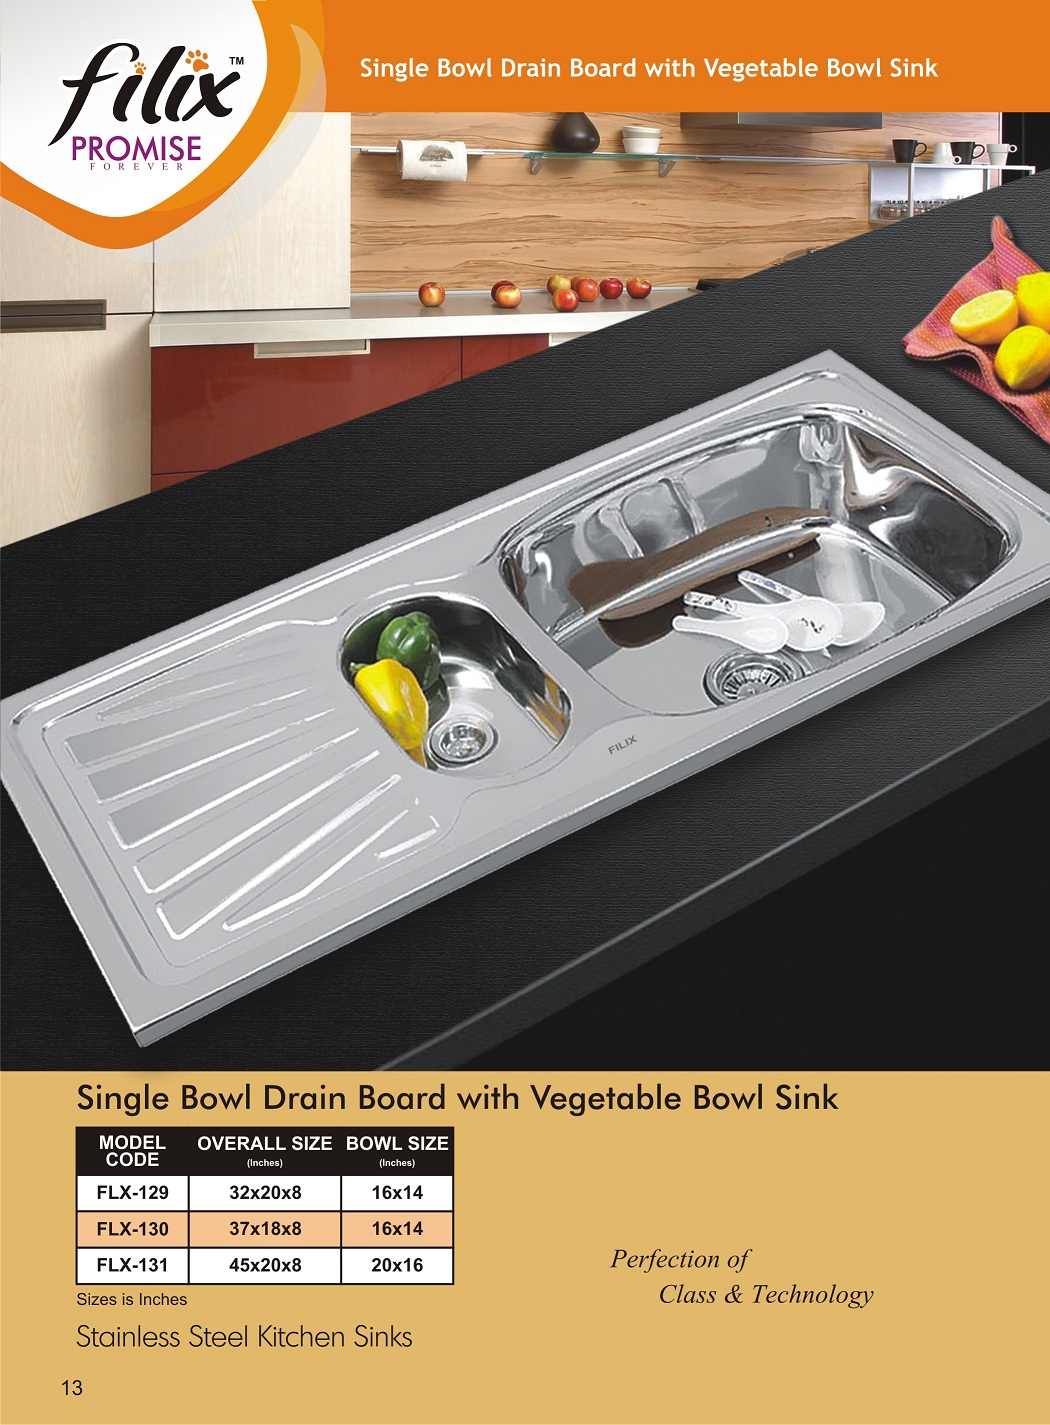 filix Single Bowl Drain Board With Vegetable Bowl Sink